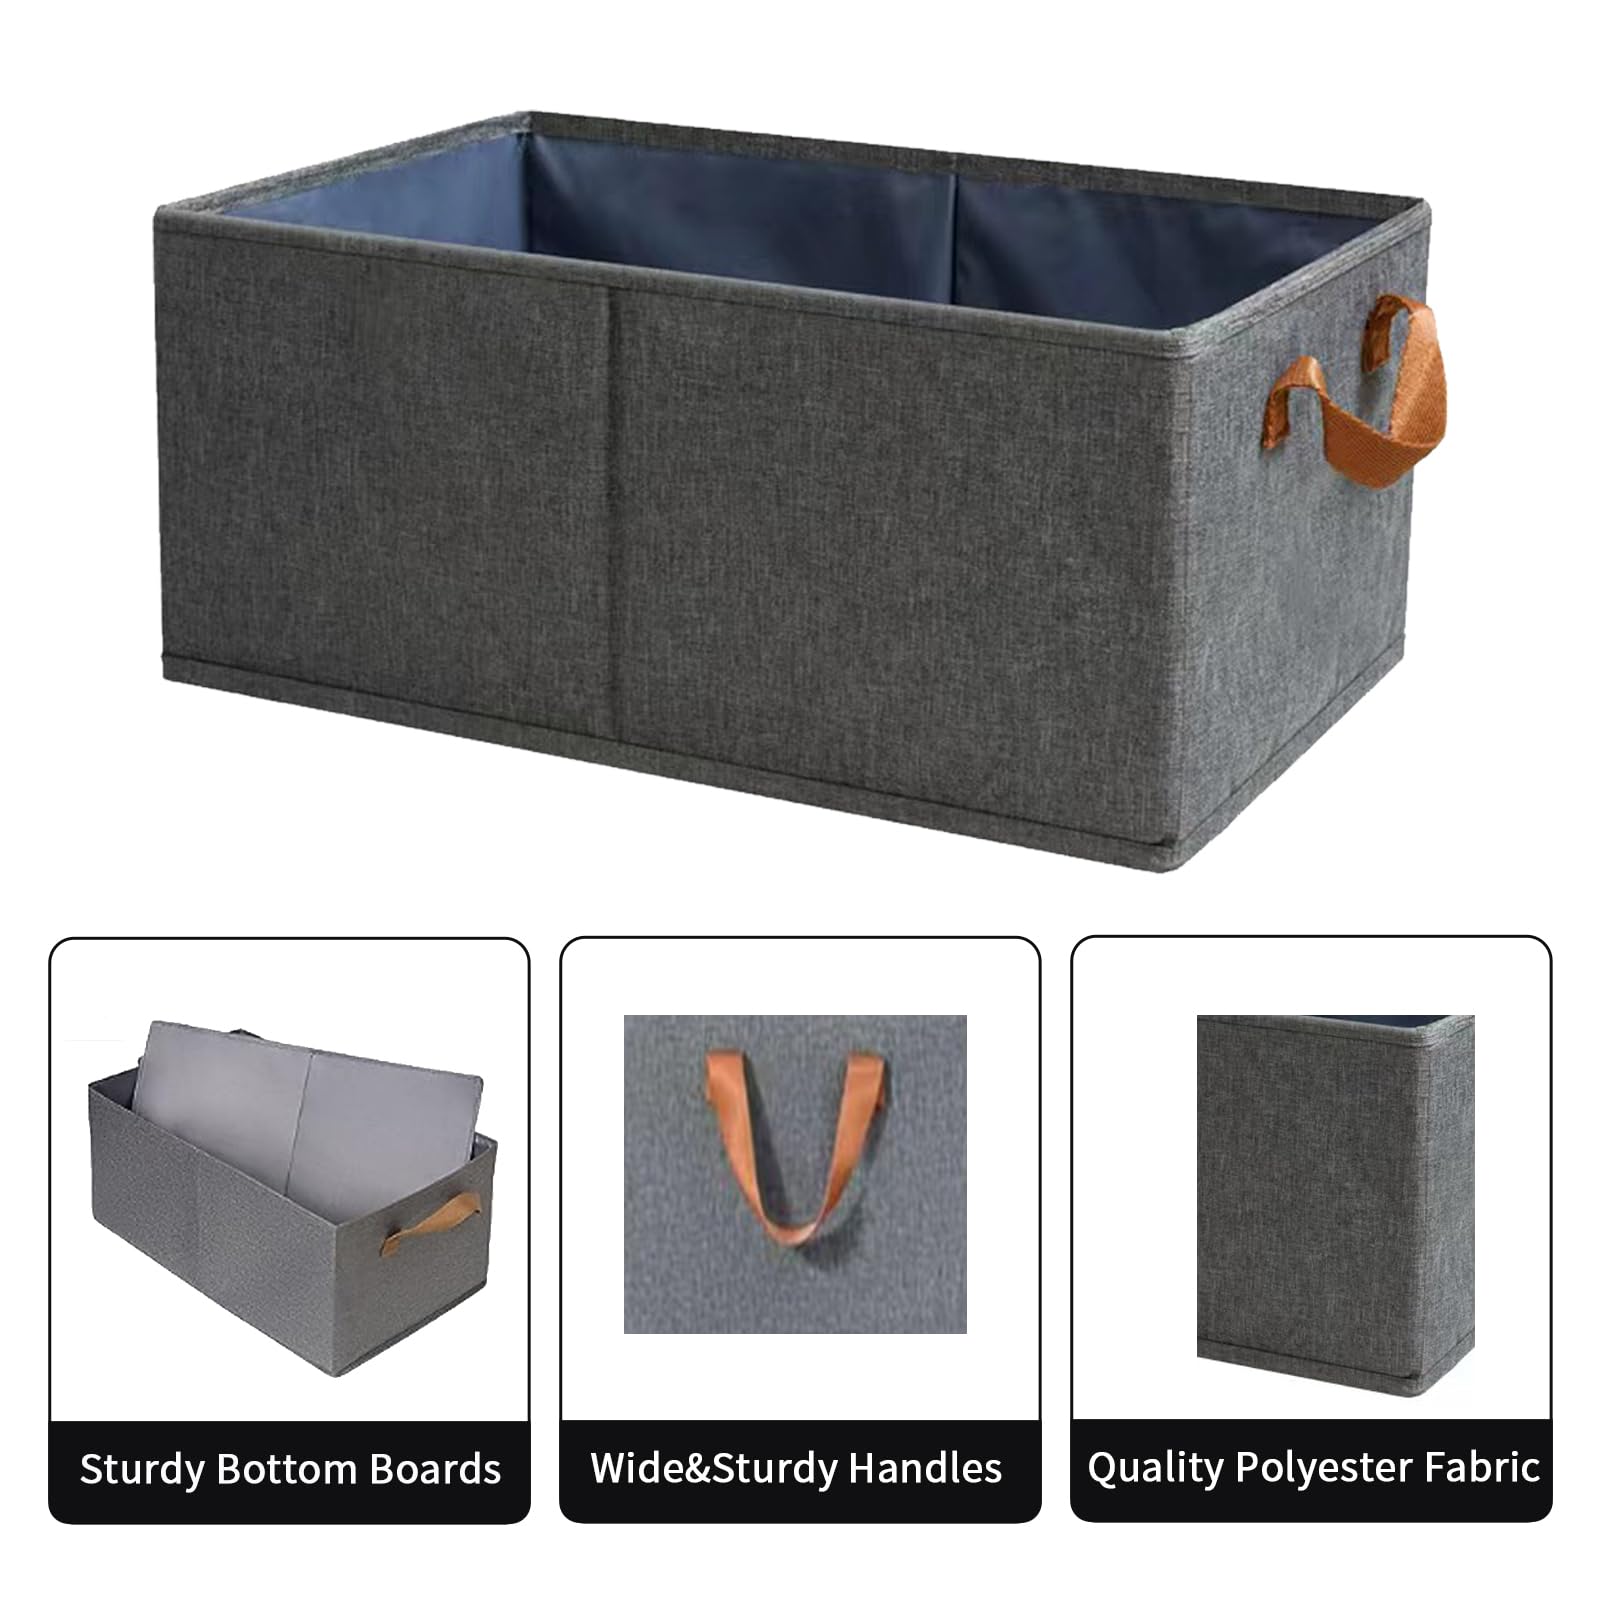 Almiugkex Clothing Storage Bins Nursery Organizers and Storage Box,Foldable Basket,for Organizing Shelves，Bedroom Storing and Closet Decorative Gray Set of 3